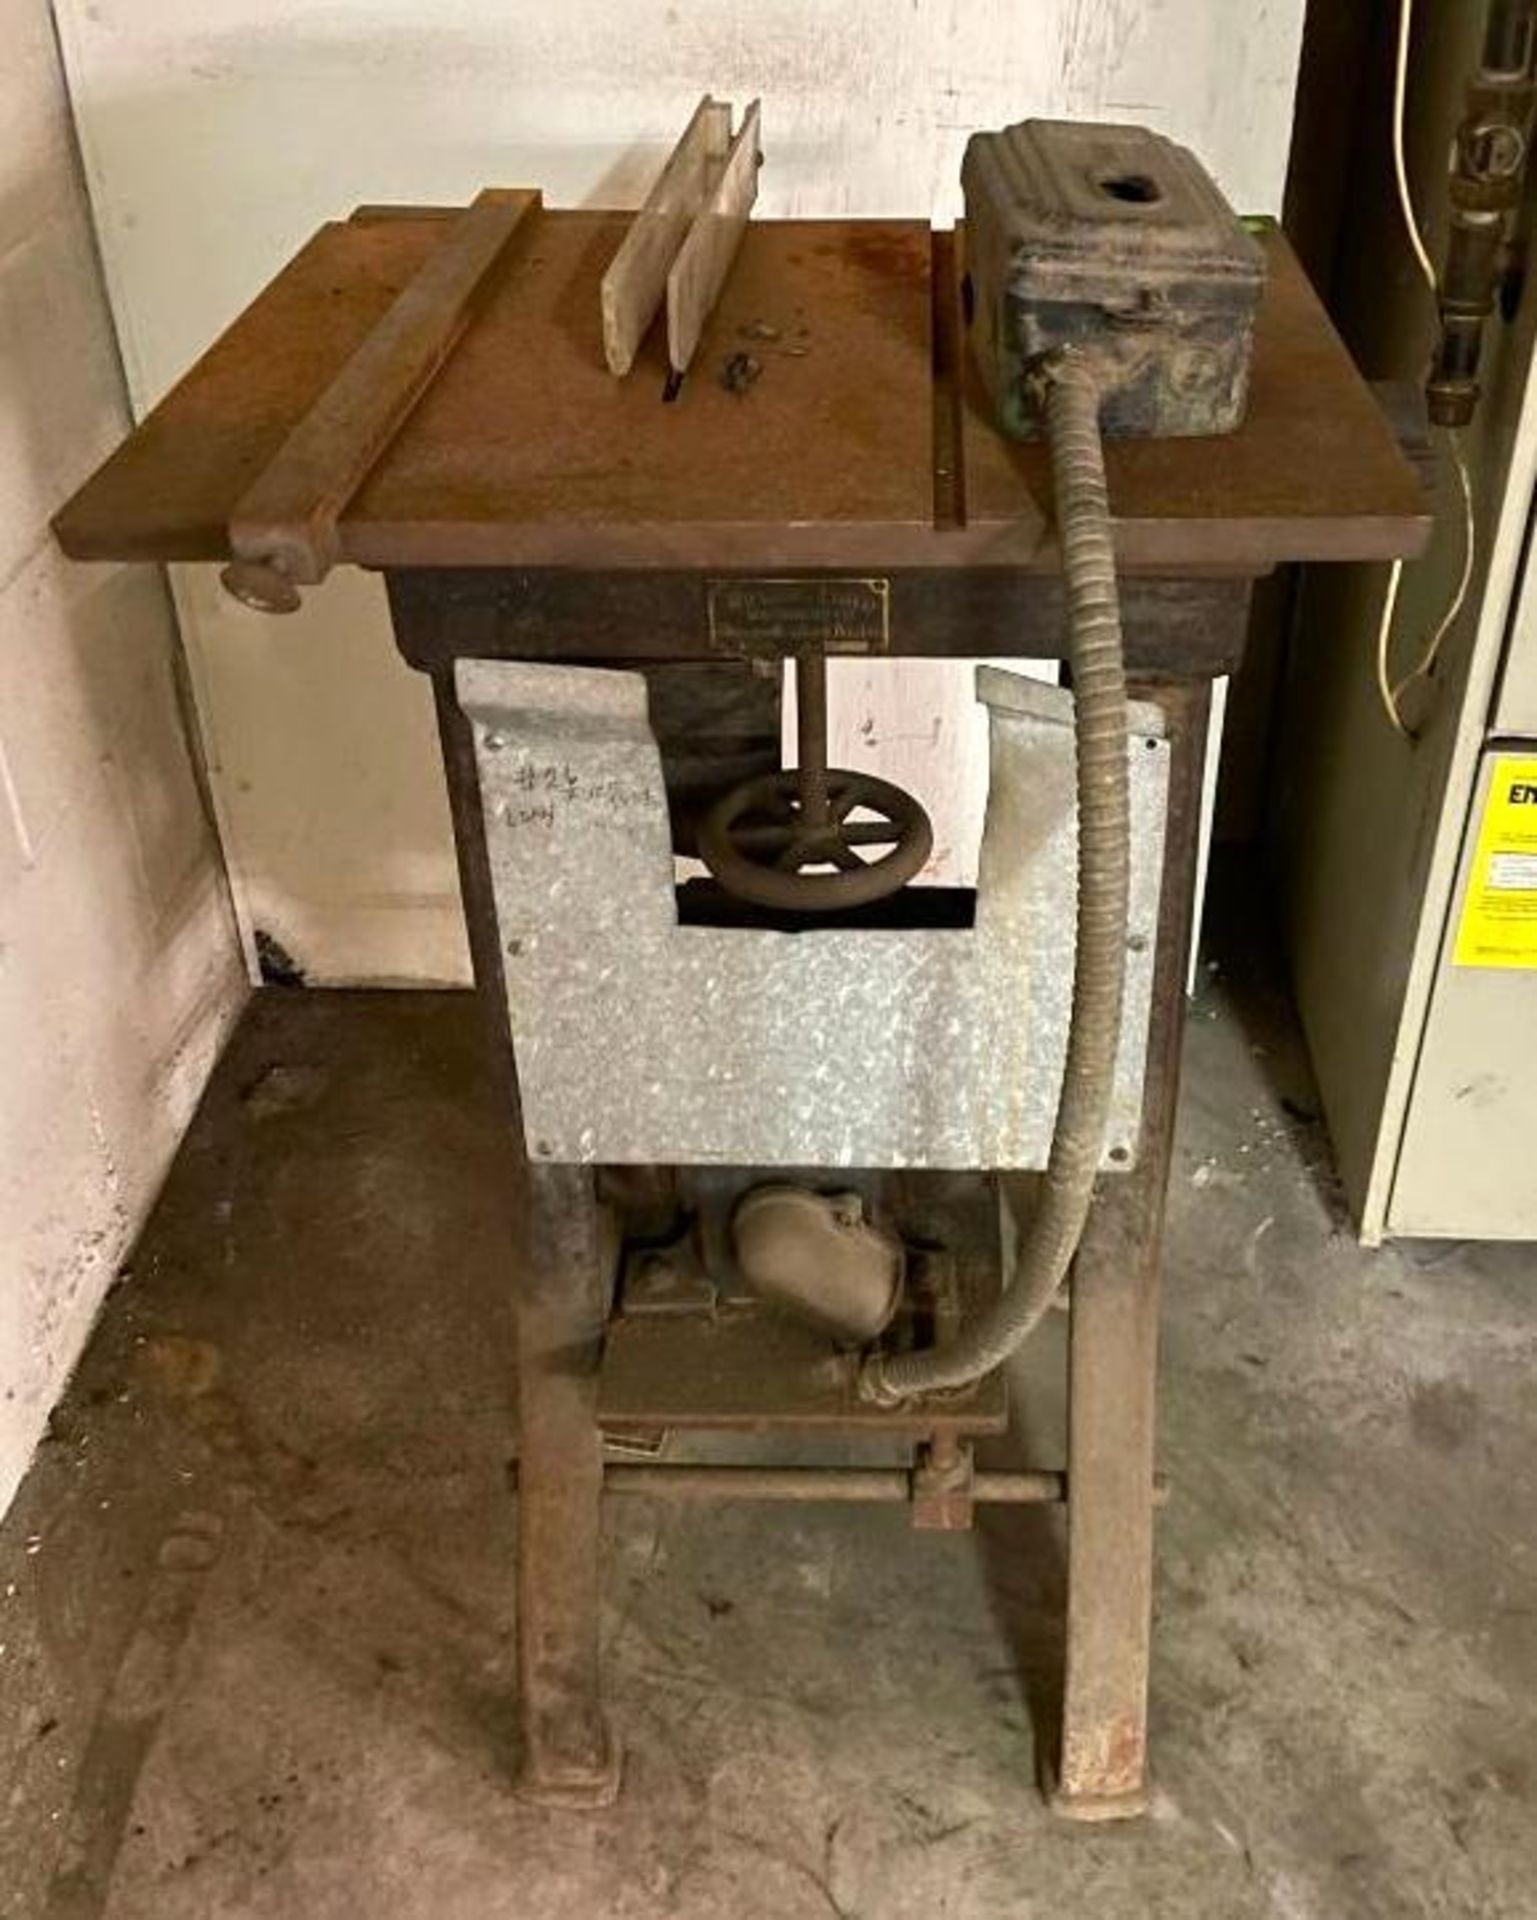 WILLIAMS LLOYD MACHINERY TABLE SAW ADDITIONAL INFO WORKING CONDITION UNKNOWN LOCATION PARTS ROOM QUA